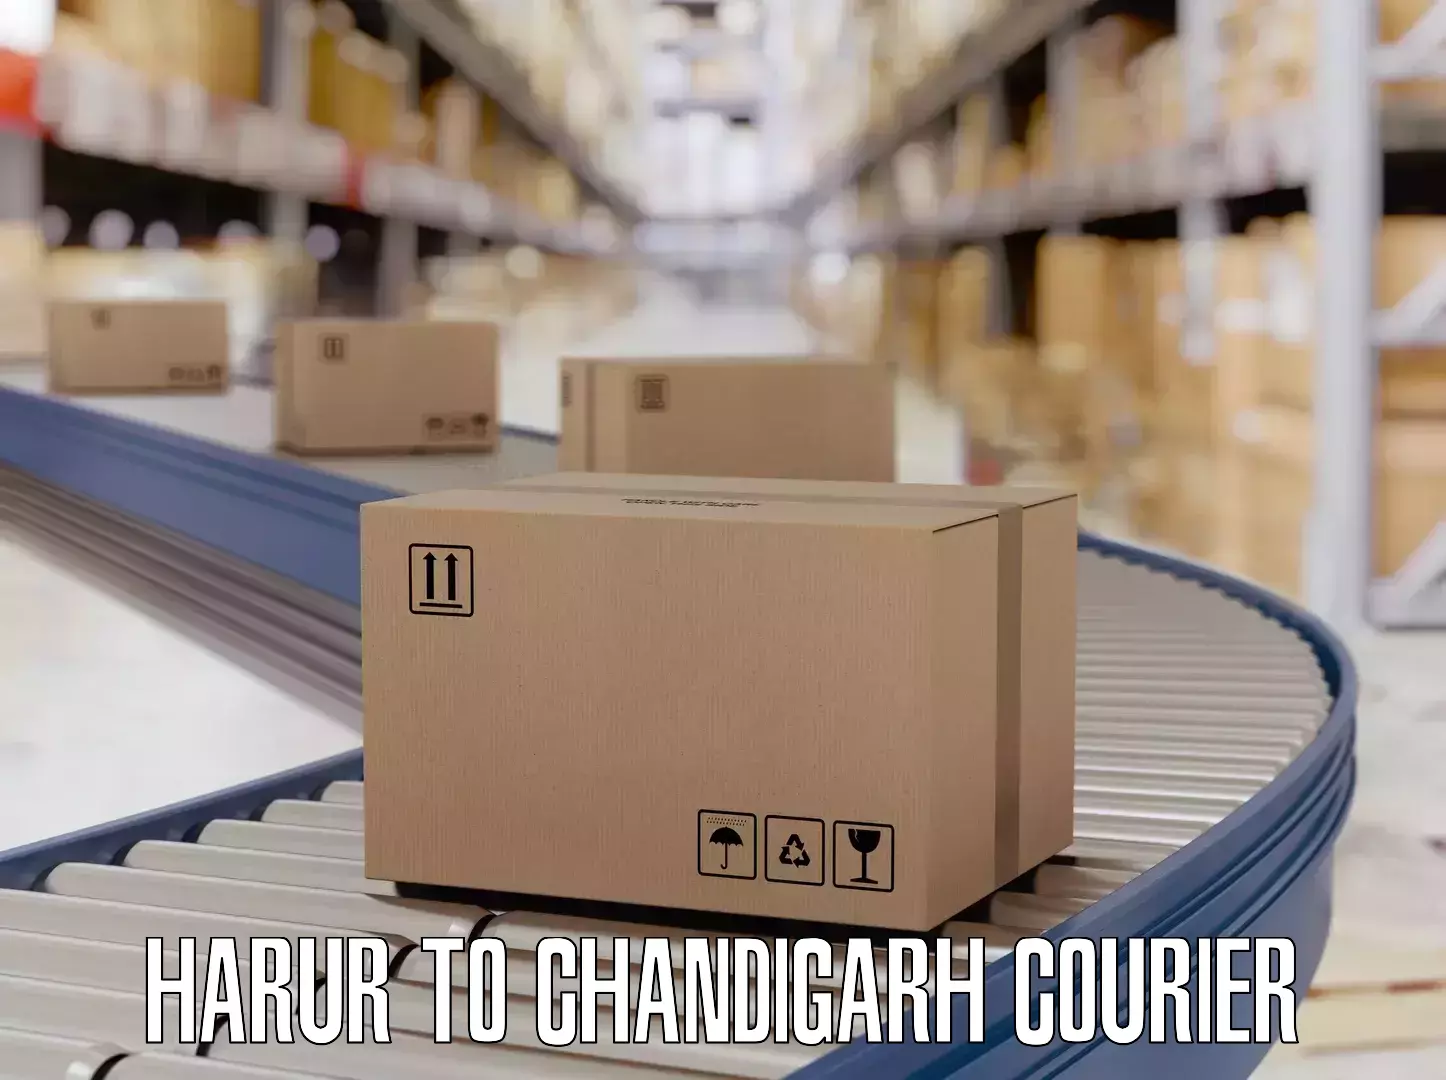 Online luggage shipping booking Harur to Chandigarh